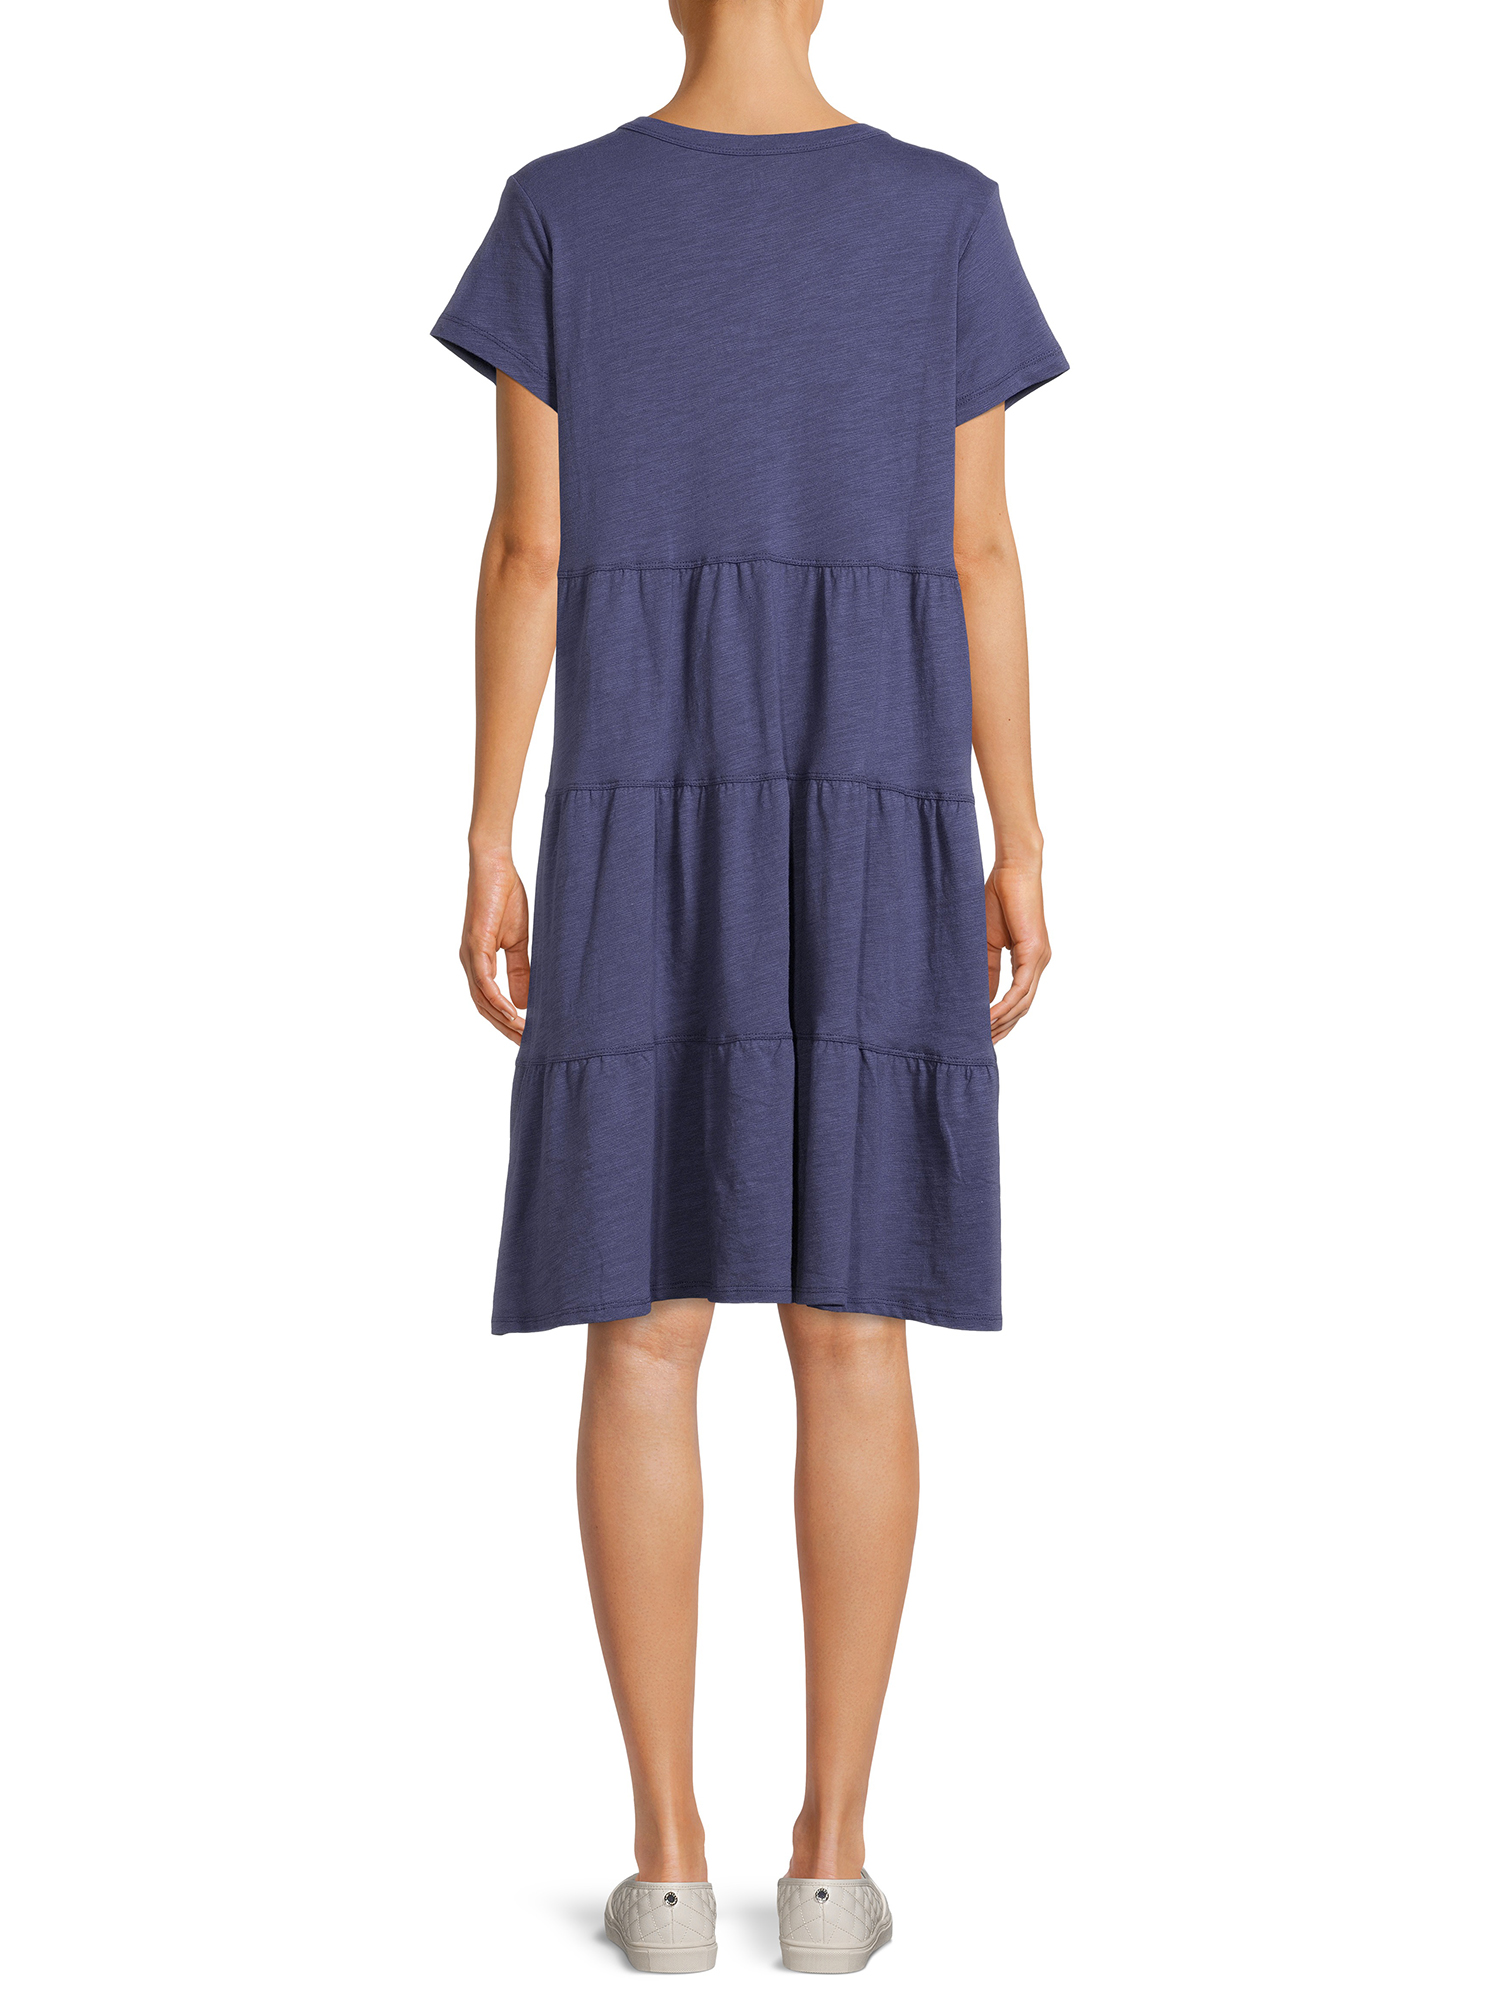 Time and Tru Women's Tiered Knit Dress - image 3 of 7